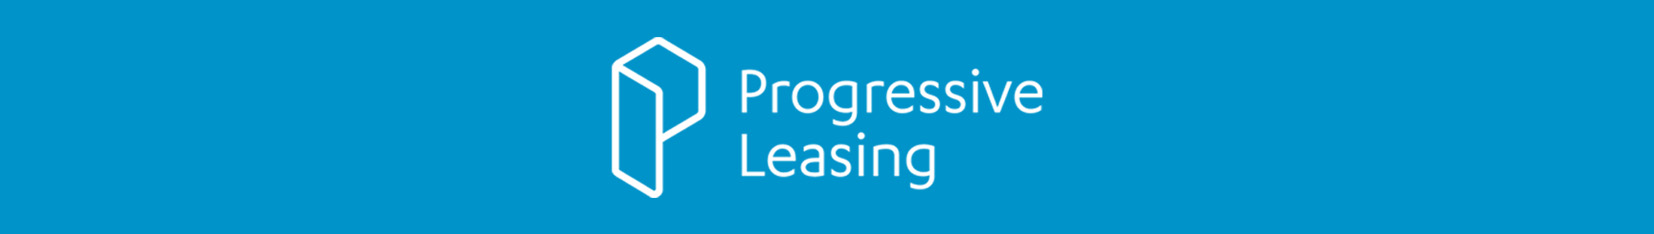 Progressive Leasing - Click to Apply Today